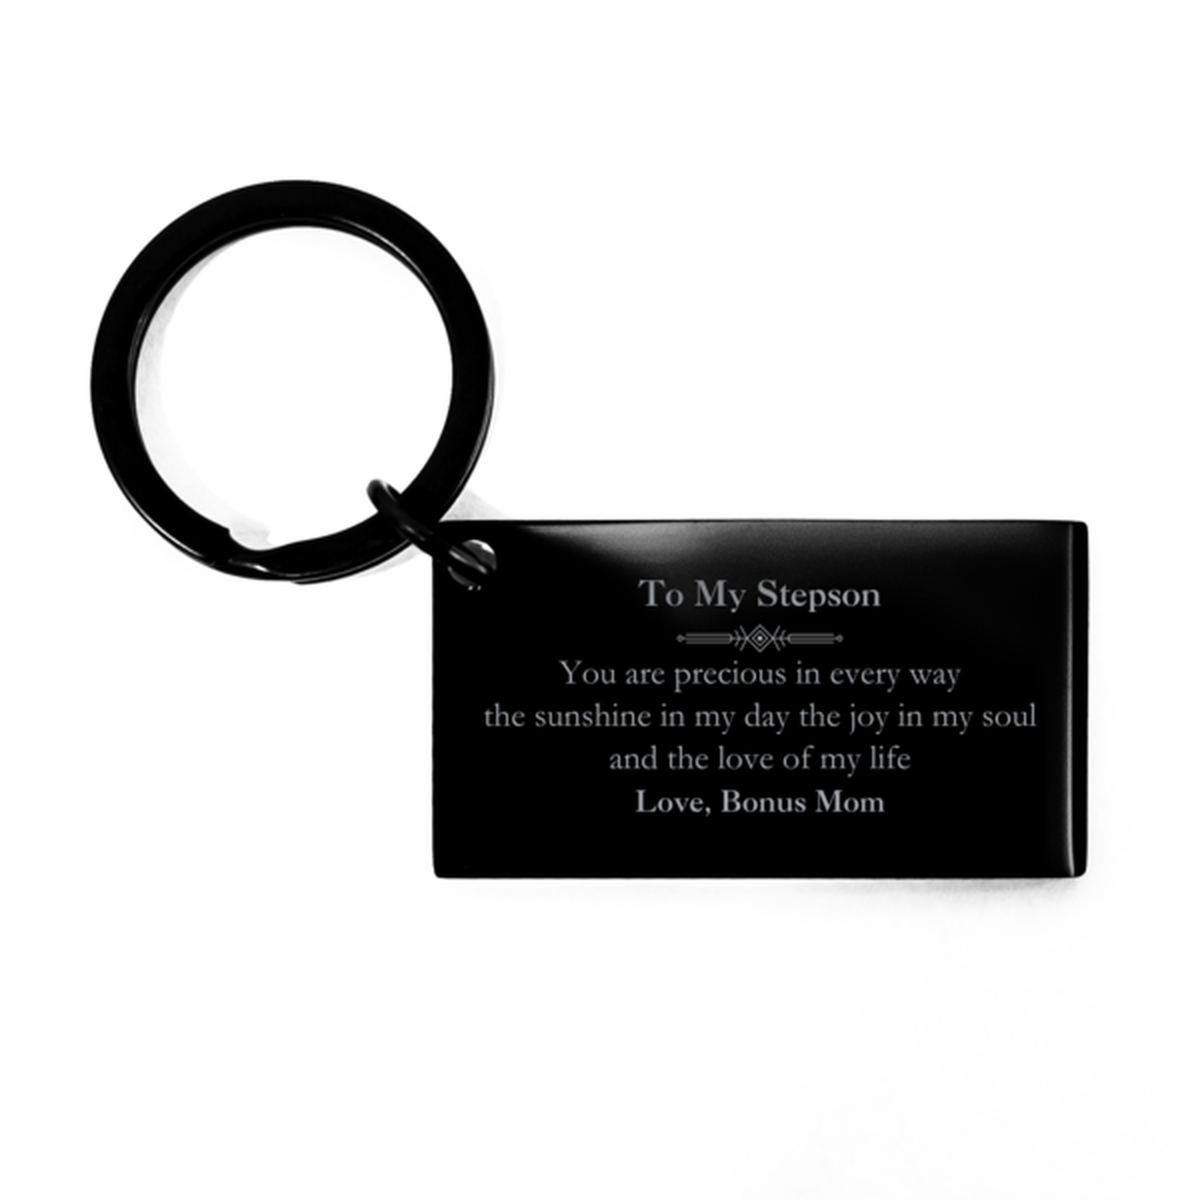 Graduation Gifts for Stepson Keychain Present from Bonus Mom, Christmas Stepson Birthday Gifts Stepson You are precious in every way the sunshine in my day. Love, Bonus Mom